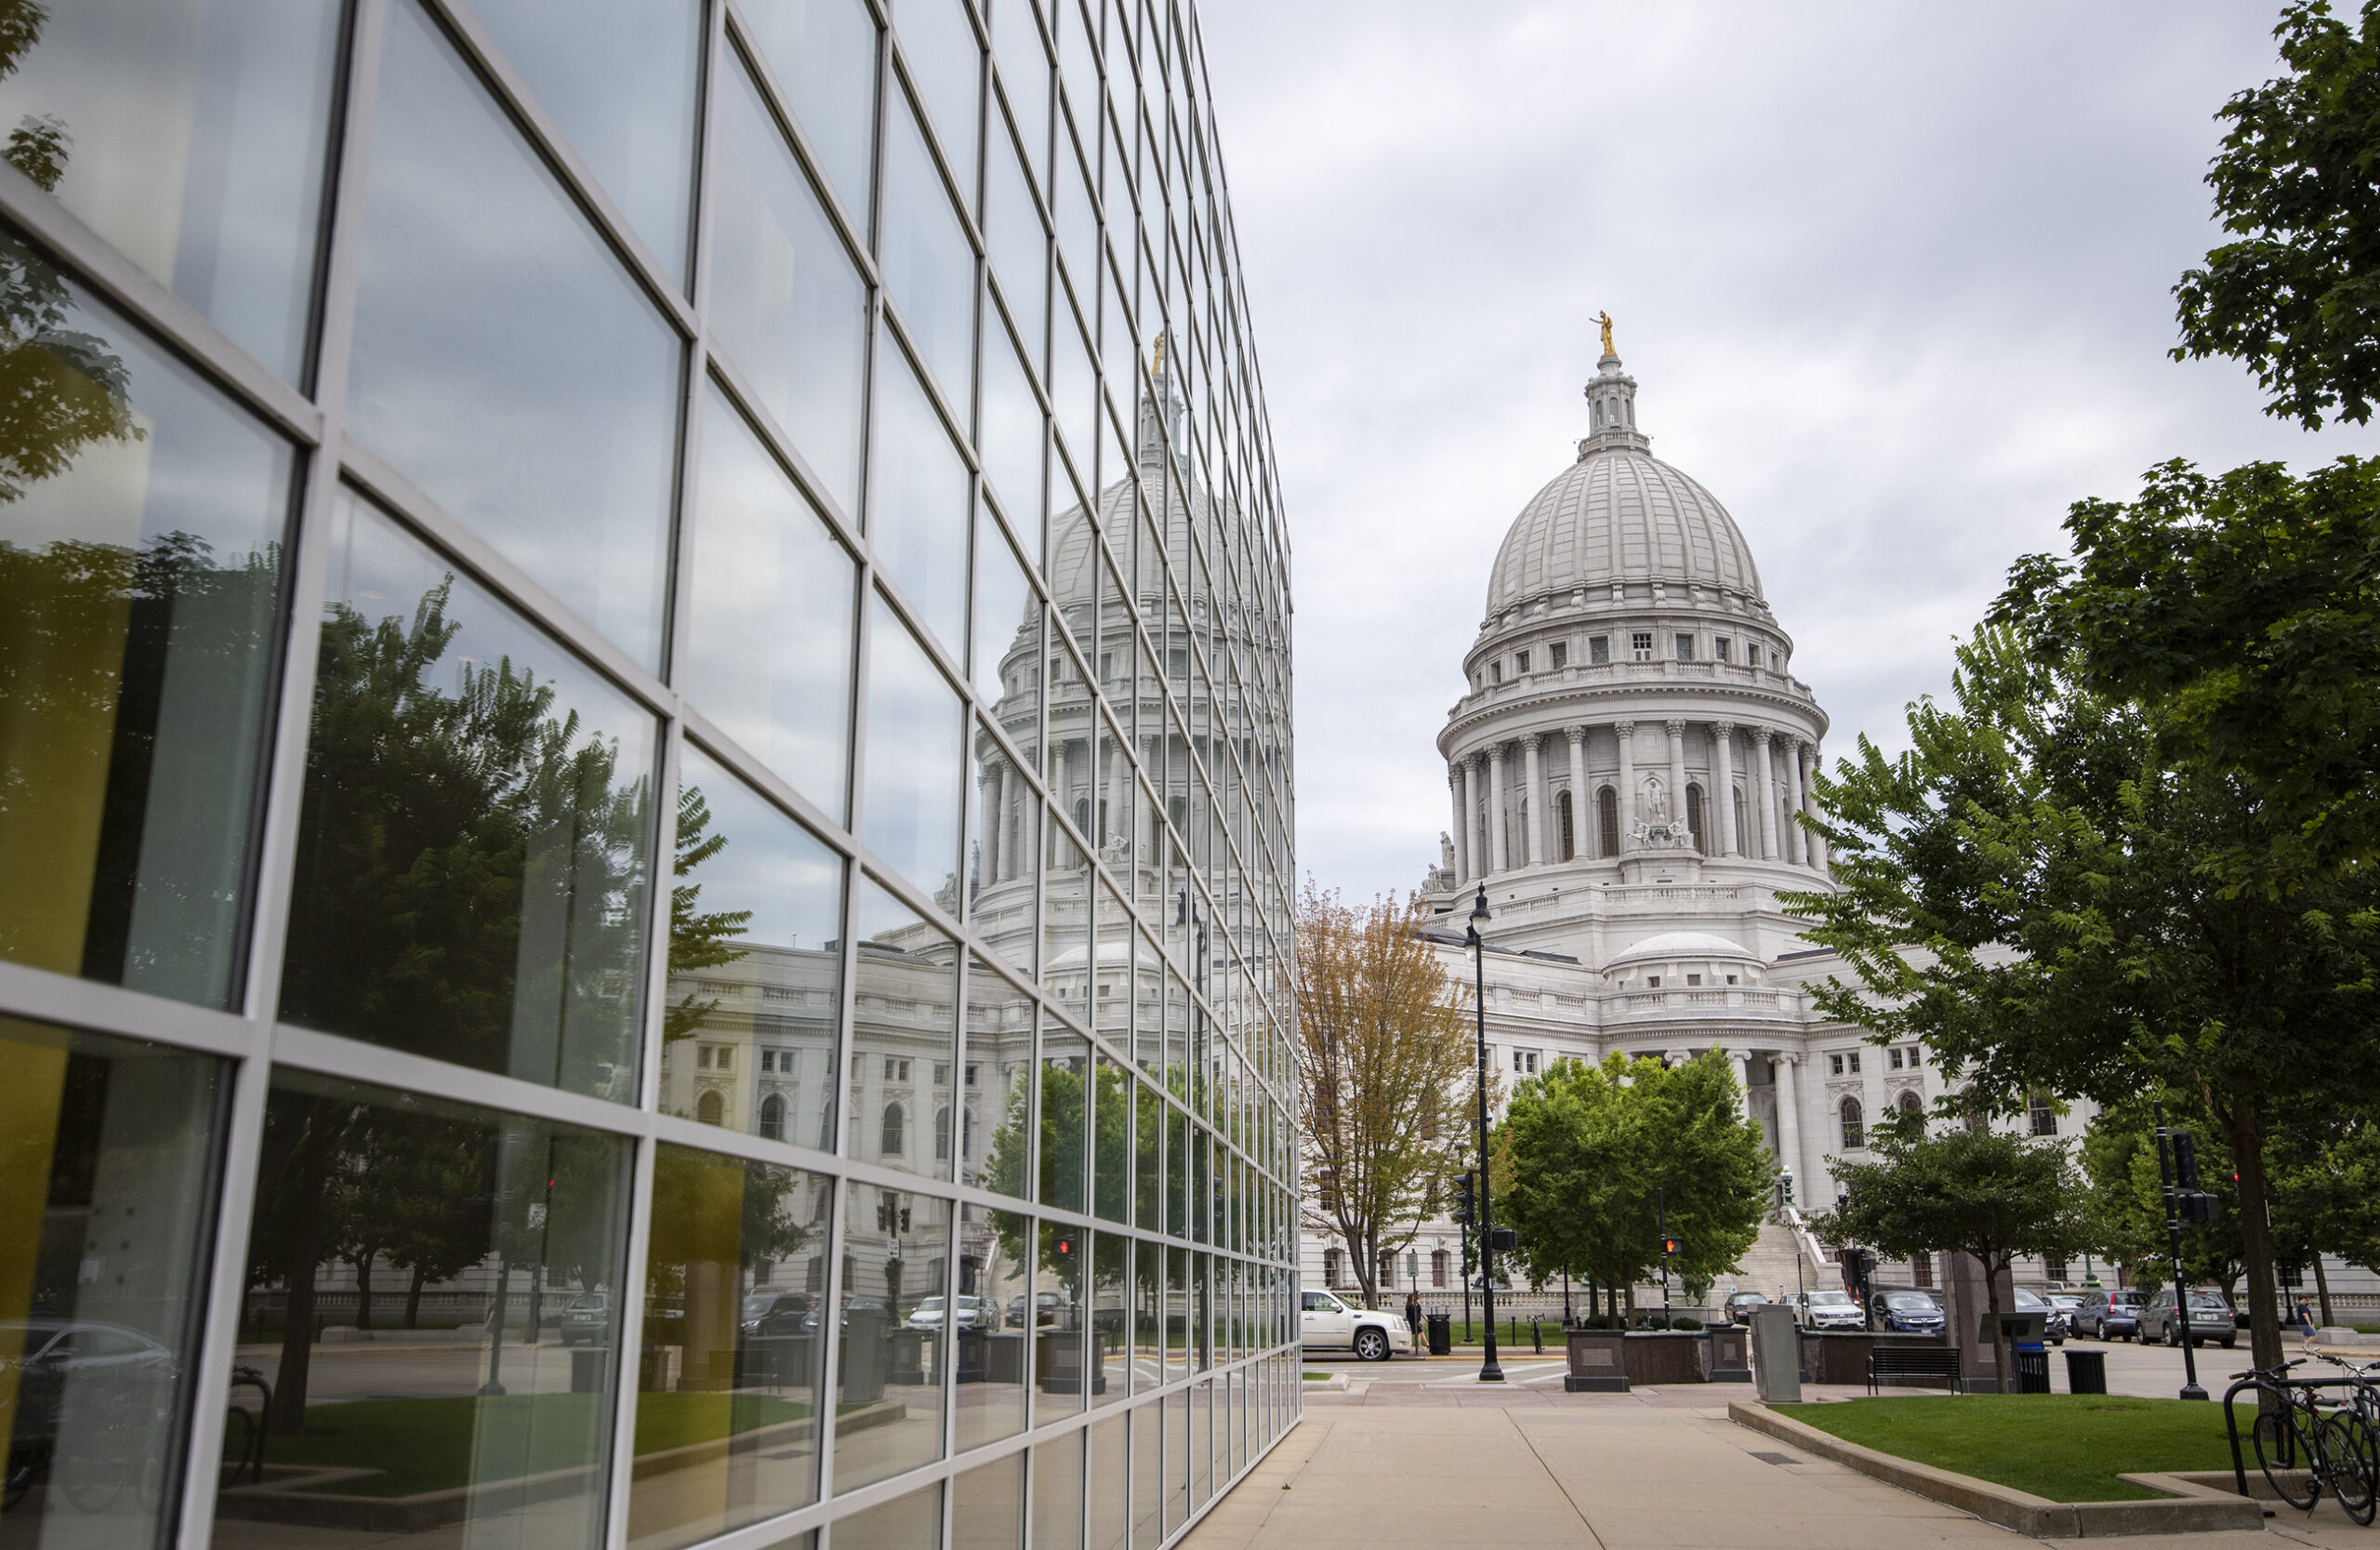 The Wisconsin State Capitol reflects on the glass walls of the US Bank Plaza